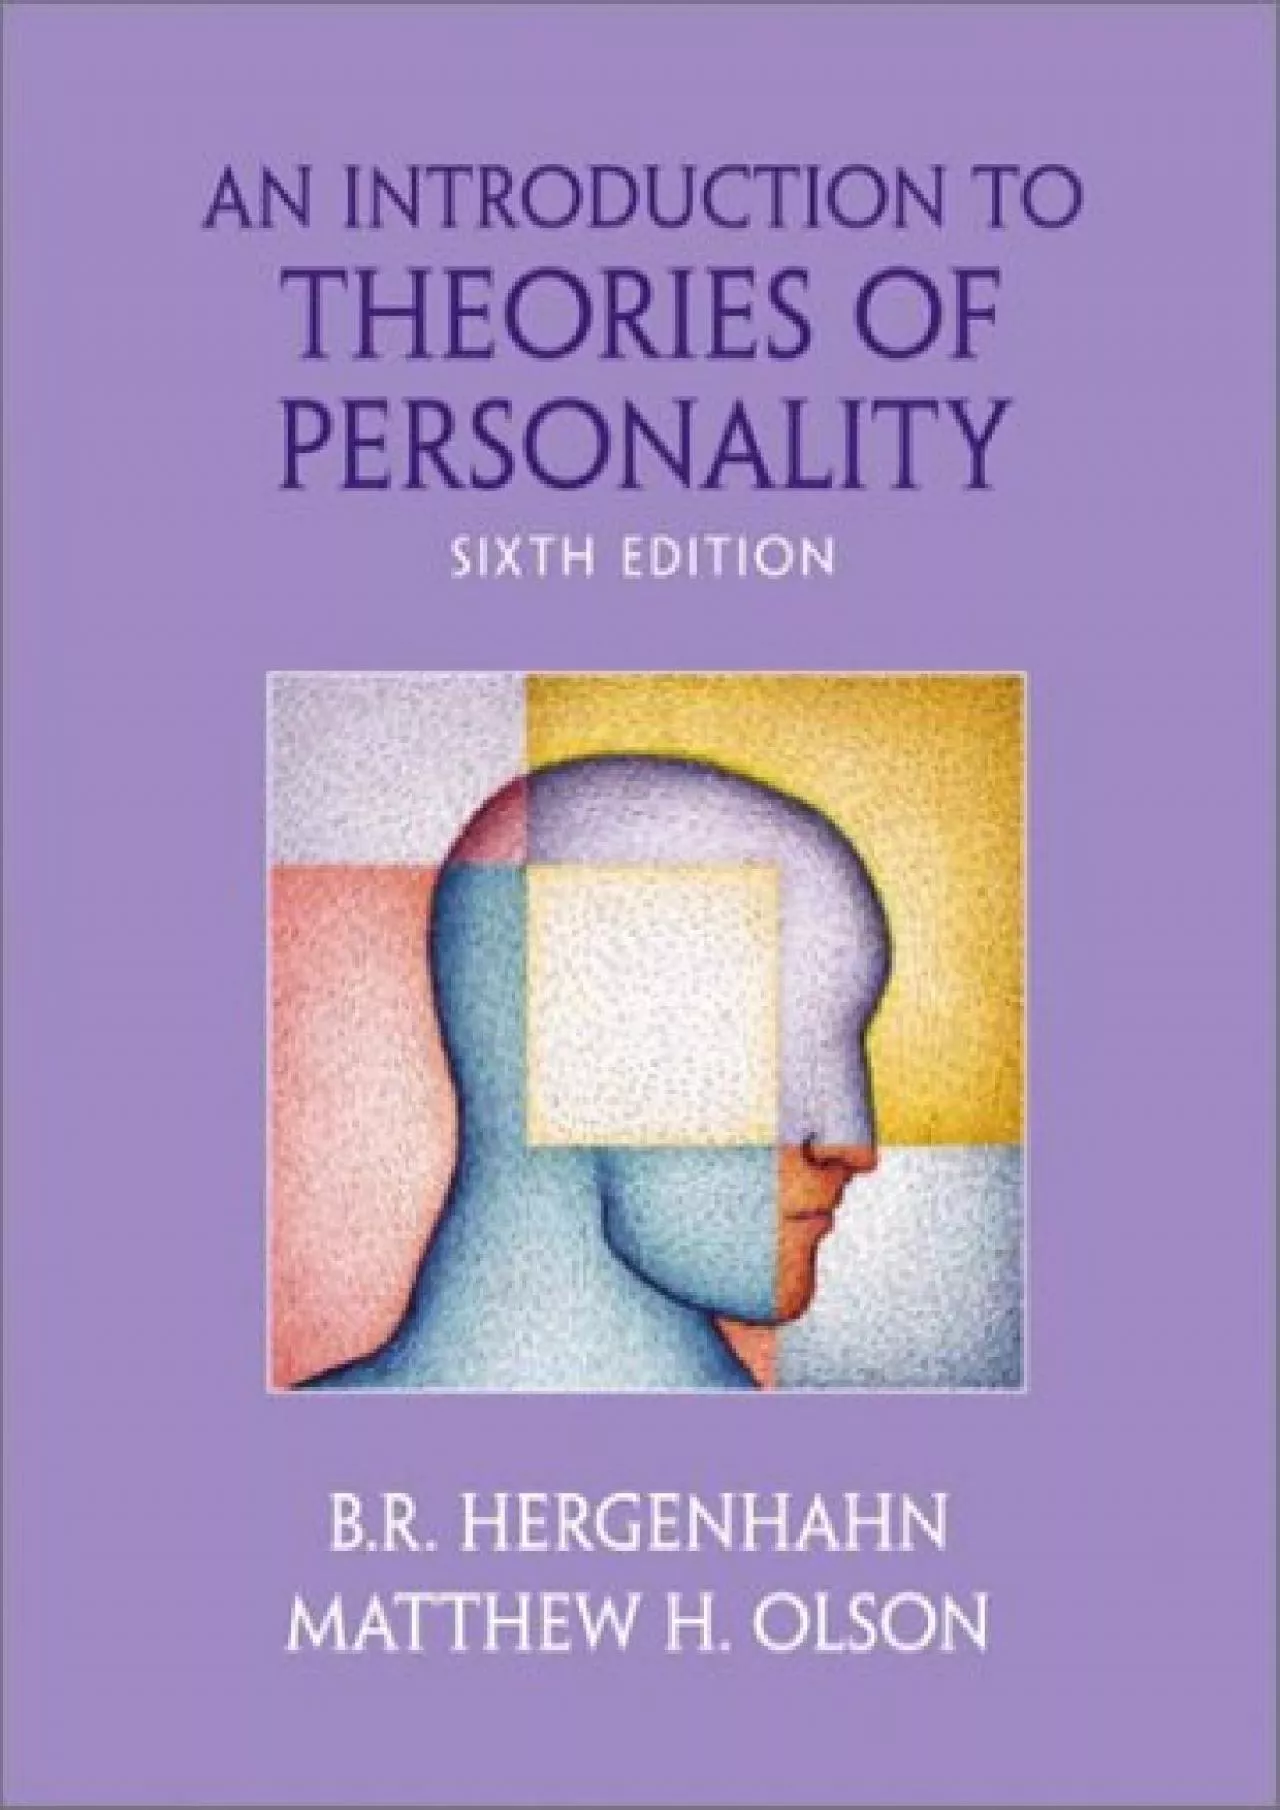 [EBOOK]-An Introduction to Theories of Personality